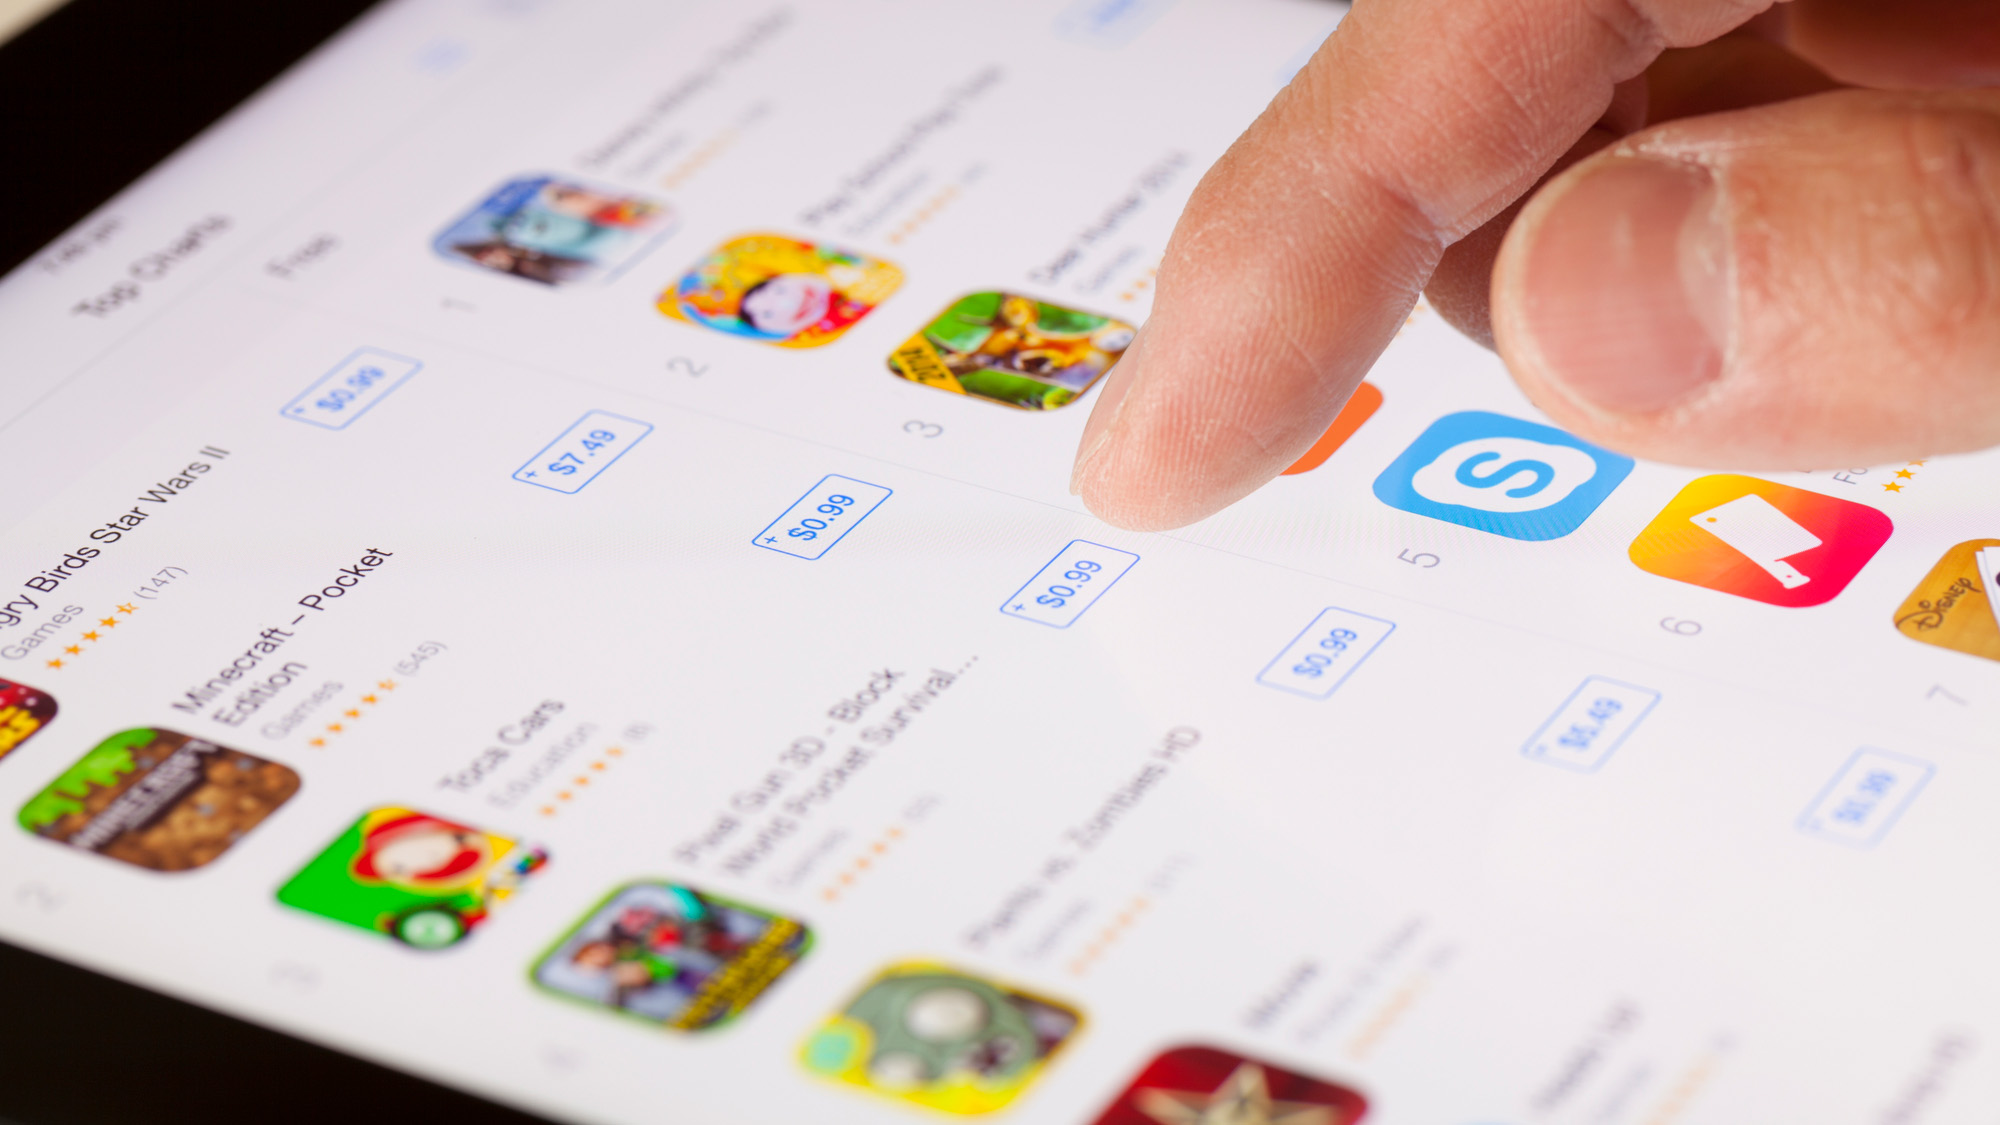 This is just the start of Apple and Google's app store wars